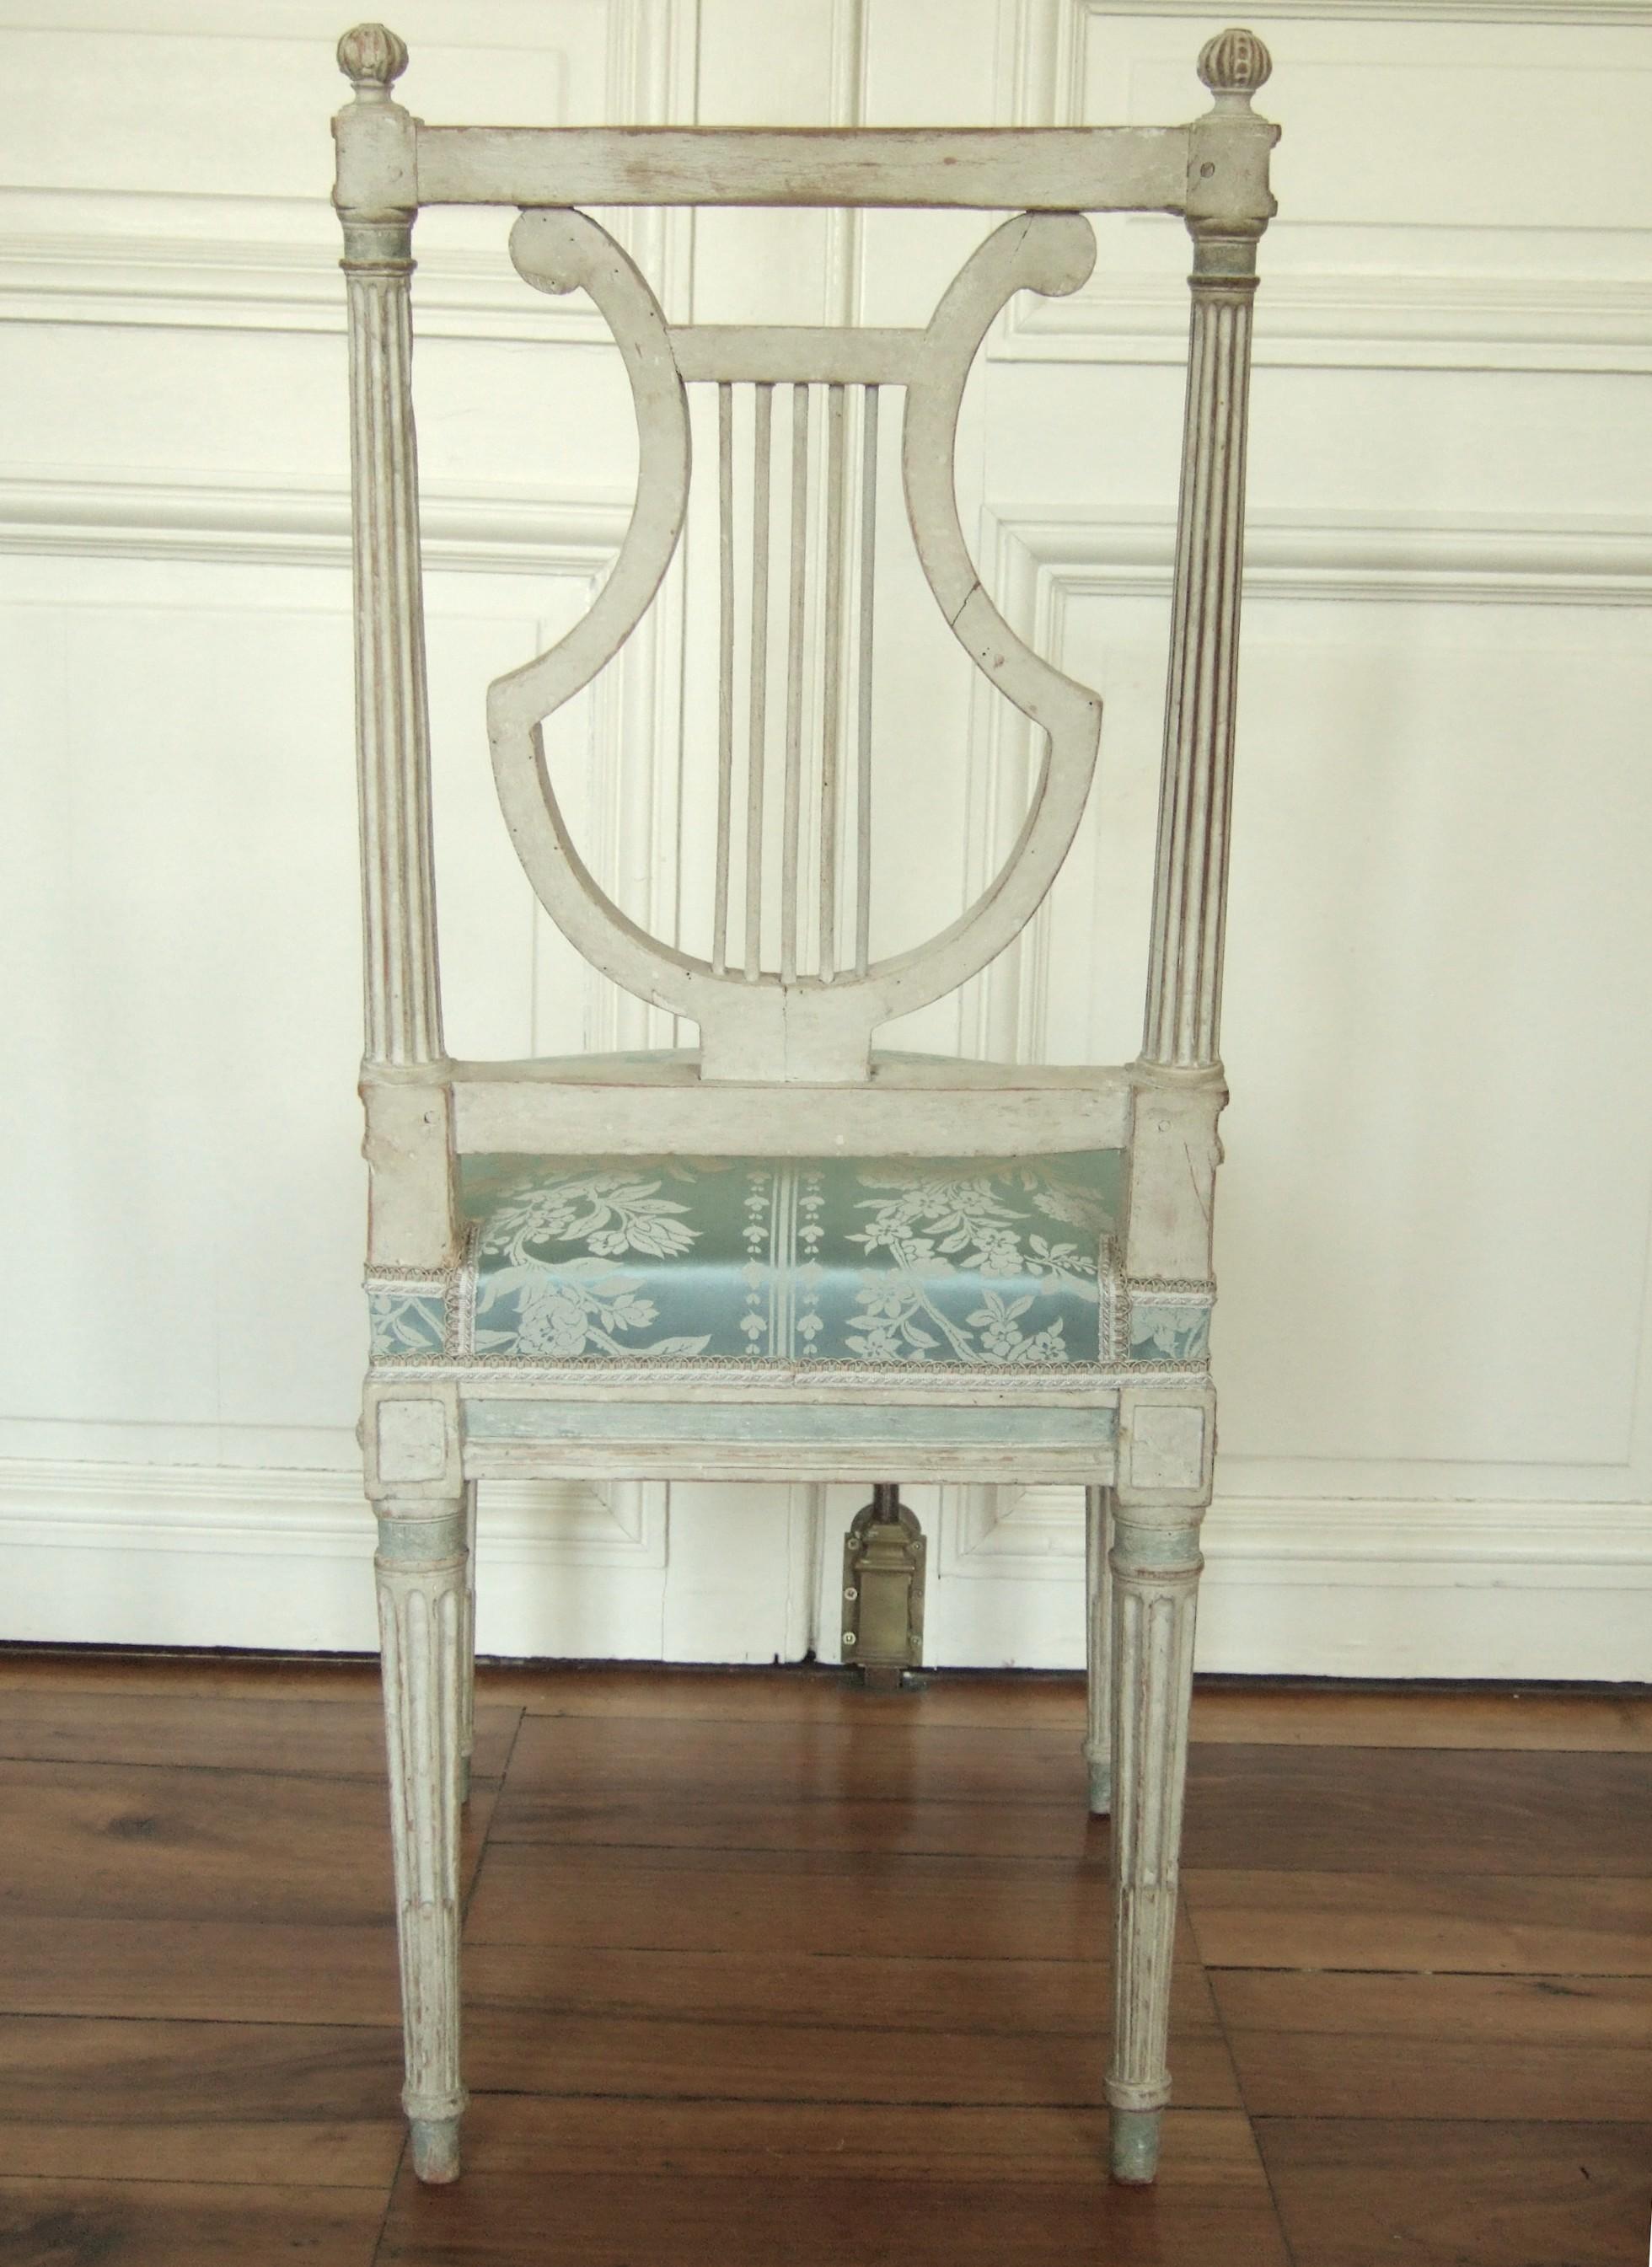 Painted Set of Original Jacob Model Chairs Lyre of Louis XVI, Late 18th Century, France For Sale